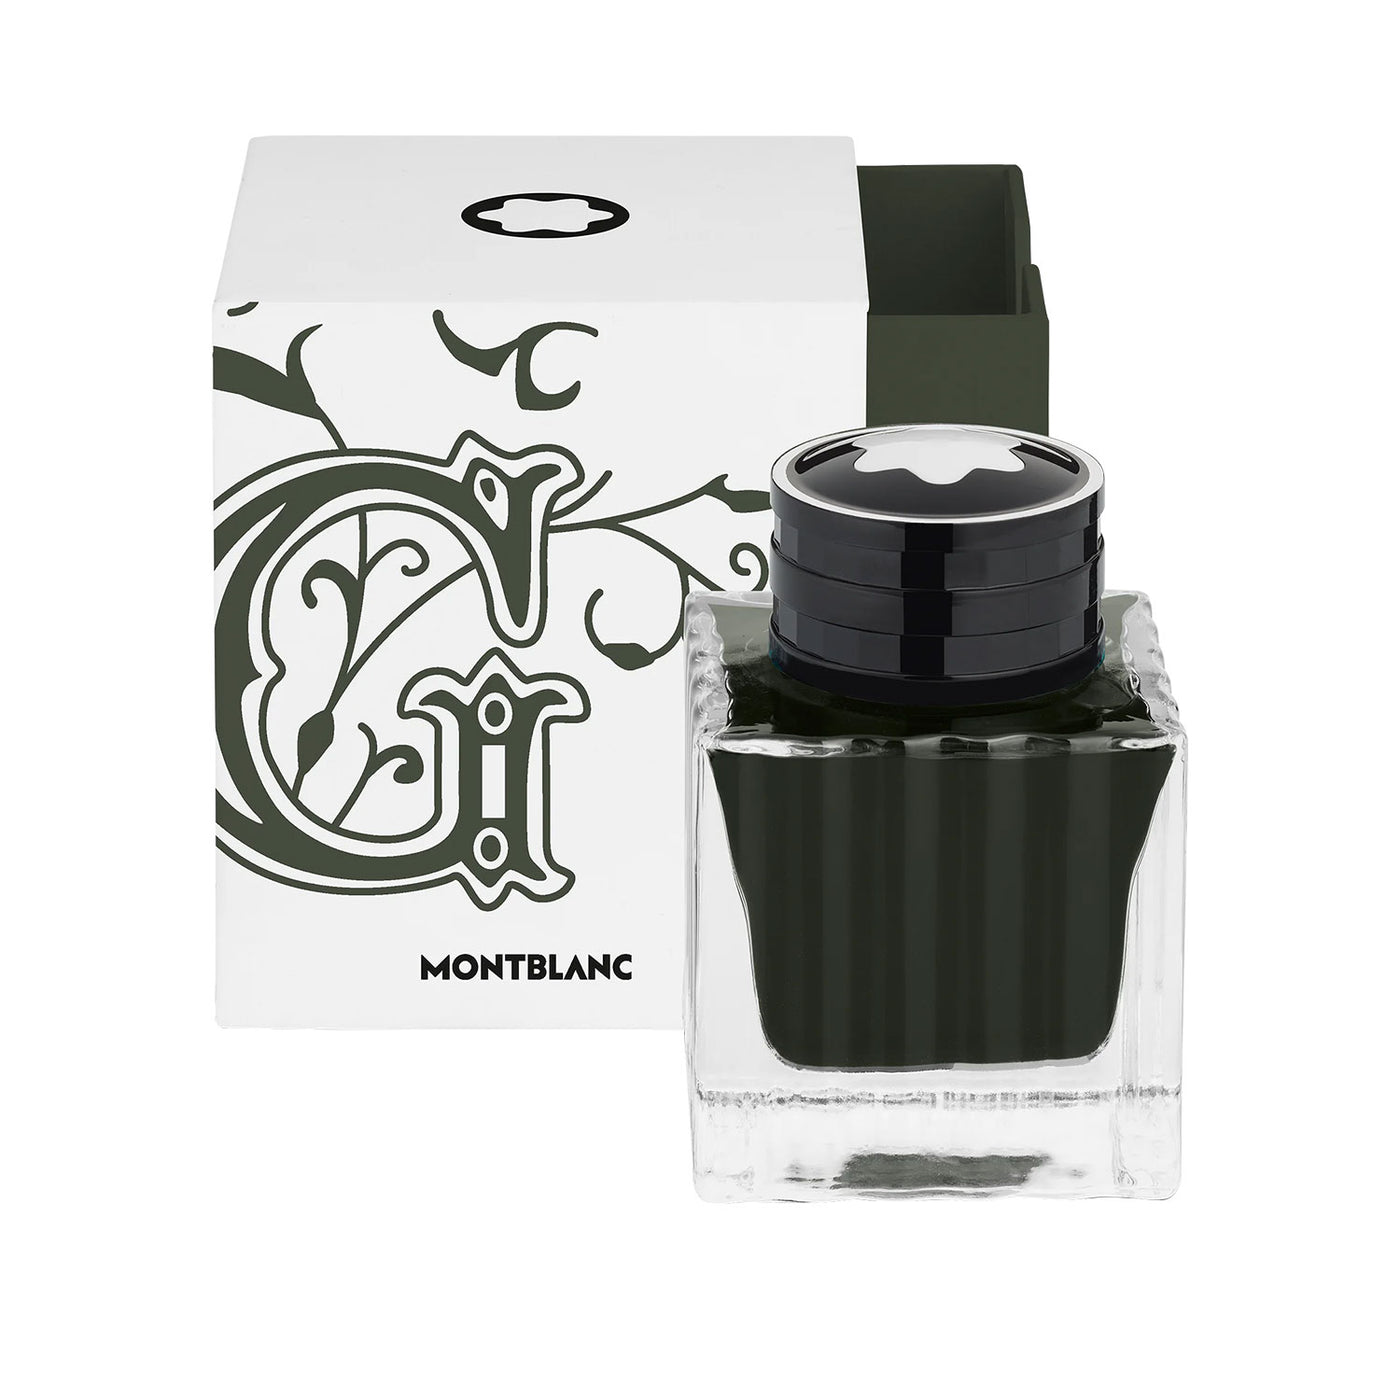 Montblanc Homage to the Brothers Grimm Ink Bottle Green 50ml